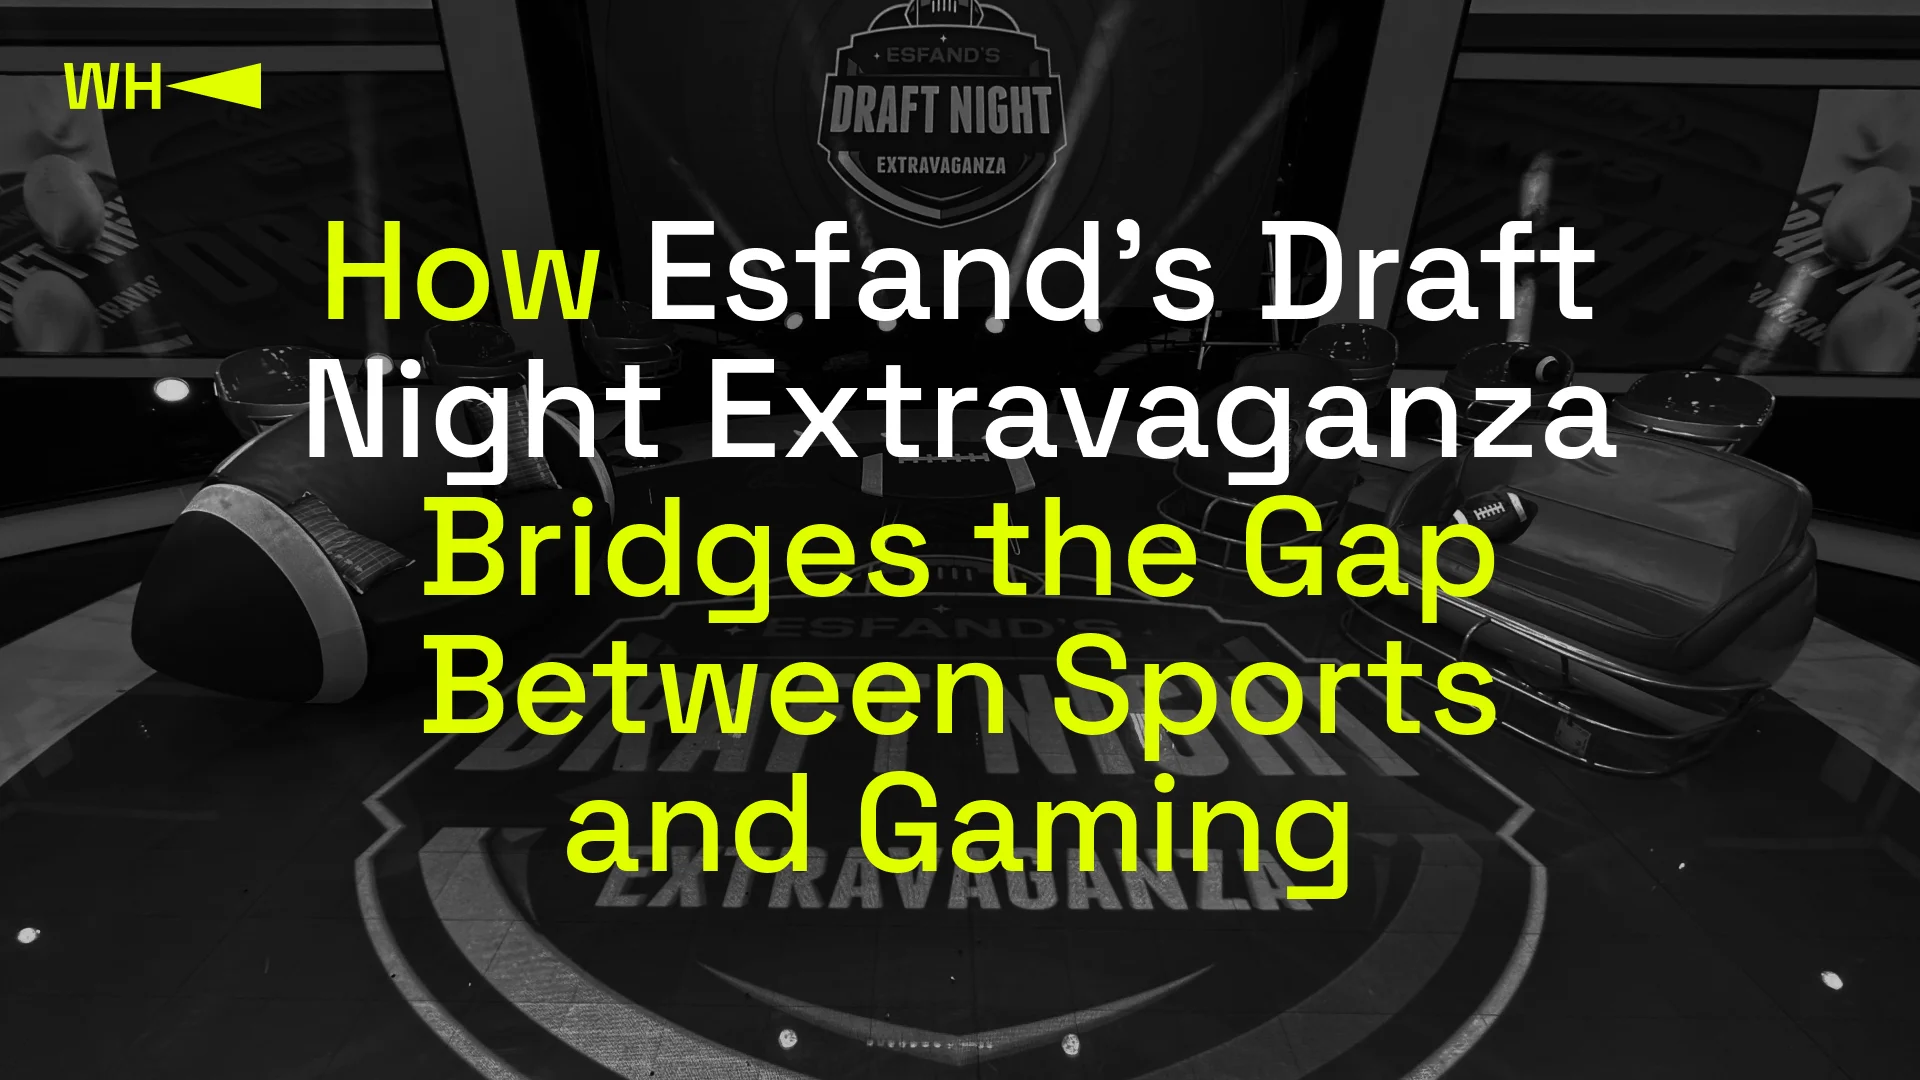 How Esfand’s Draft Night Extravaganza Bridges the Gap Between Sports and Gaming